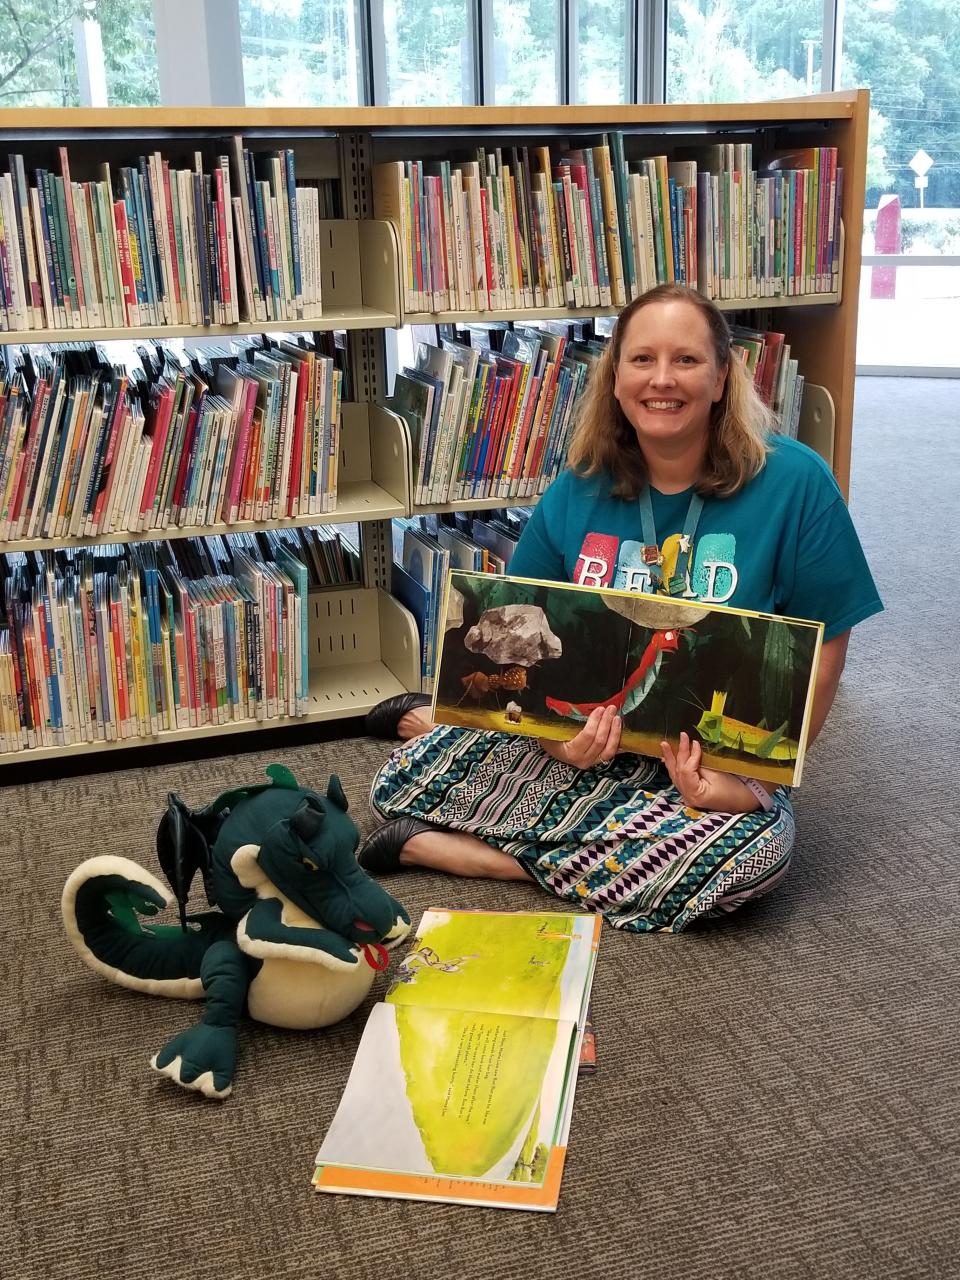 Christine Earp implemented the first sensory Story Time at the library, followed by a month-long “Celebration of Autism and Neurodiversity” in 2021 that provided programming during April, which is Autism Awareness Month.